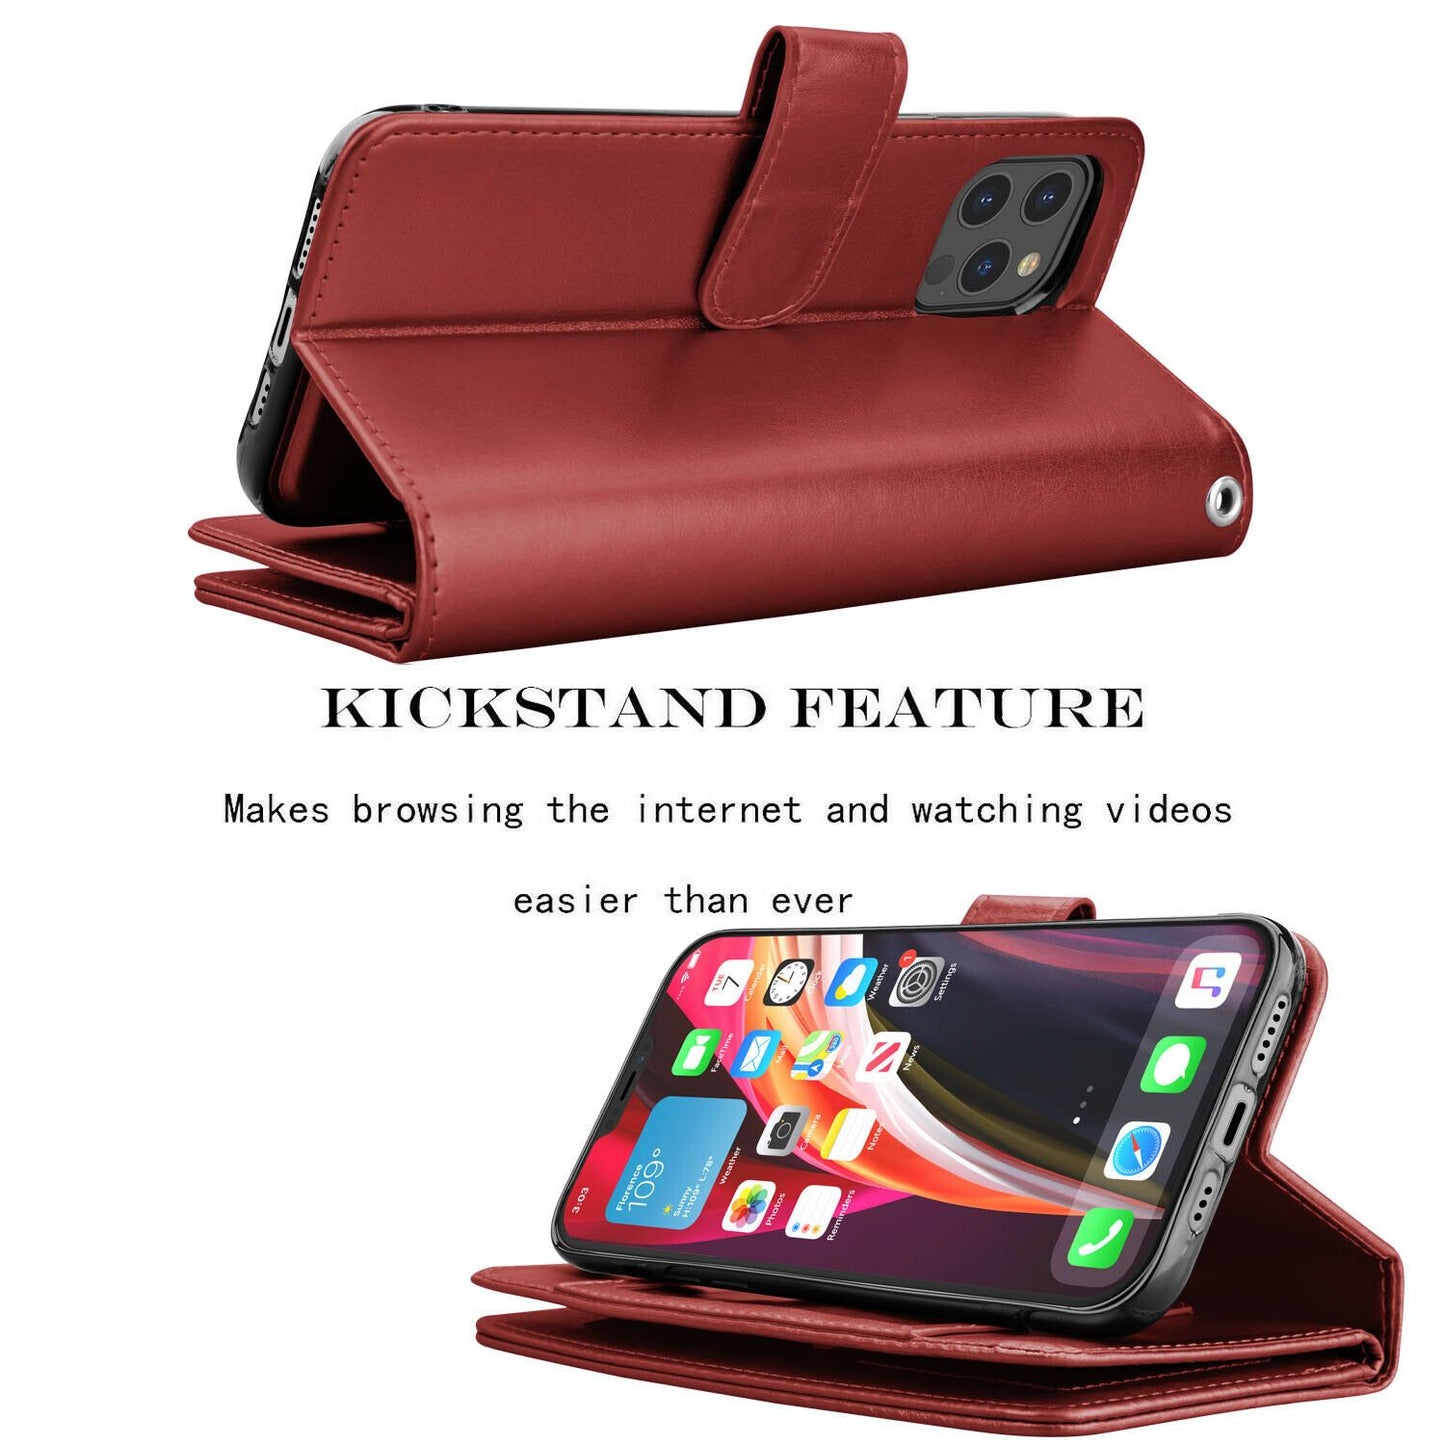 Wallet Case Flip Leather Card Stand Cover For iPhone - carolay.co